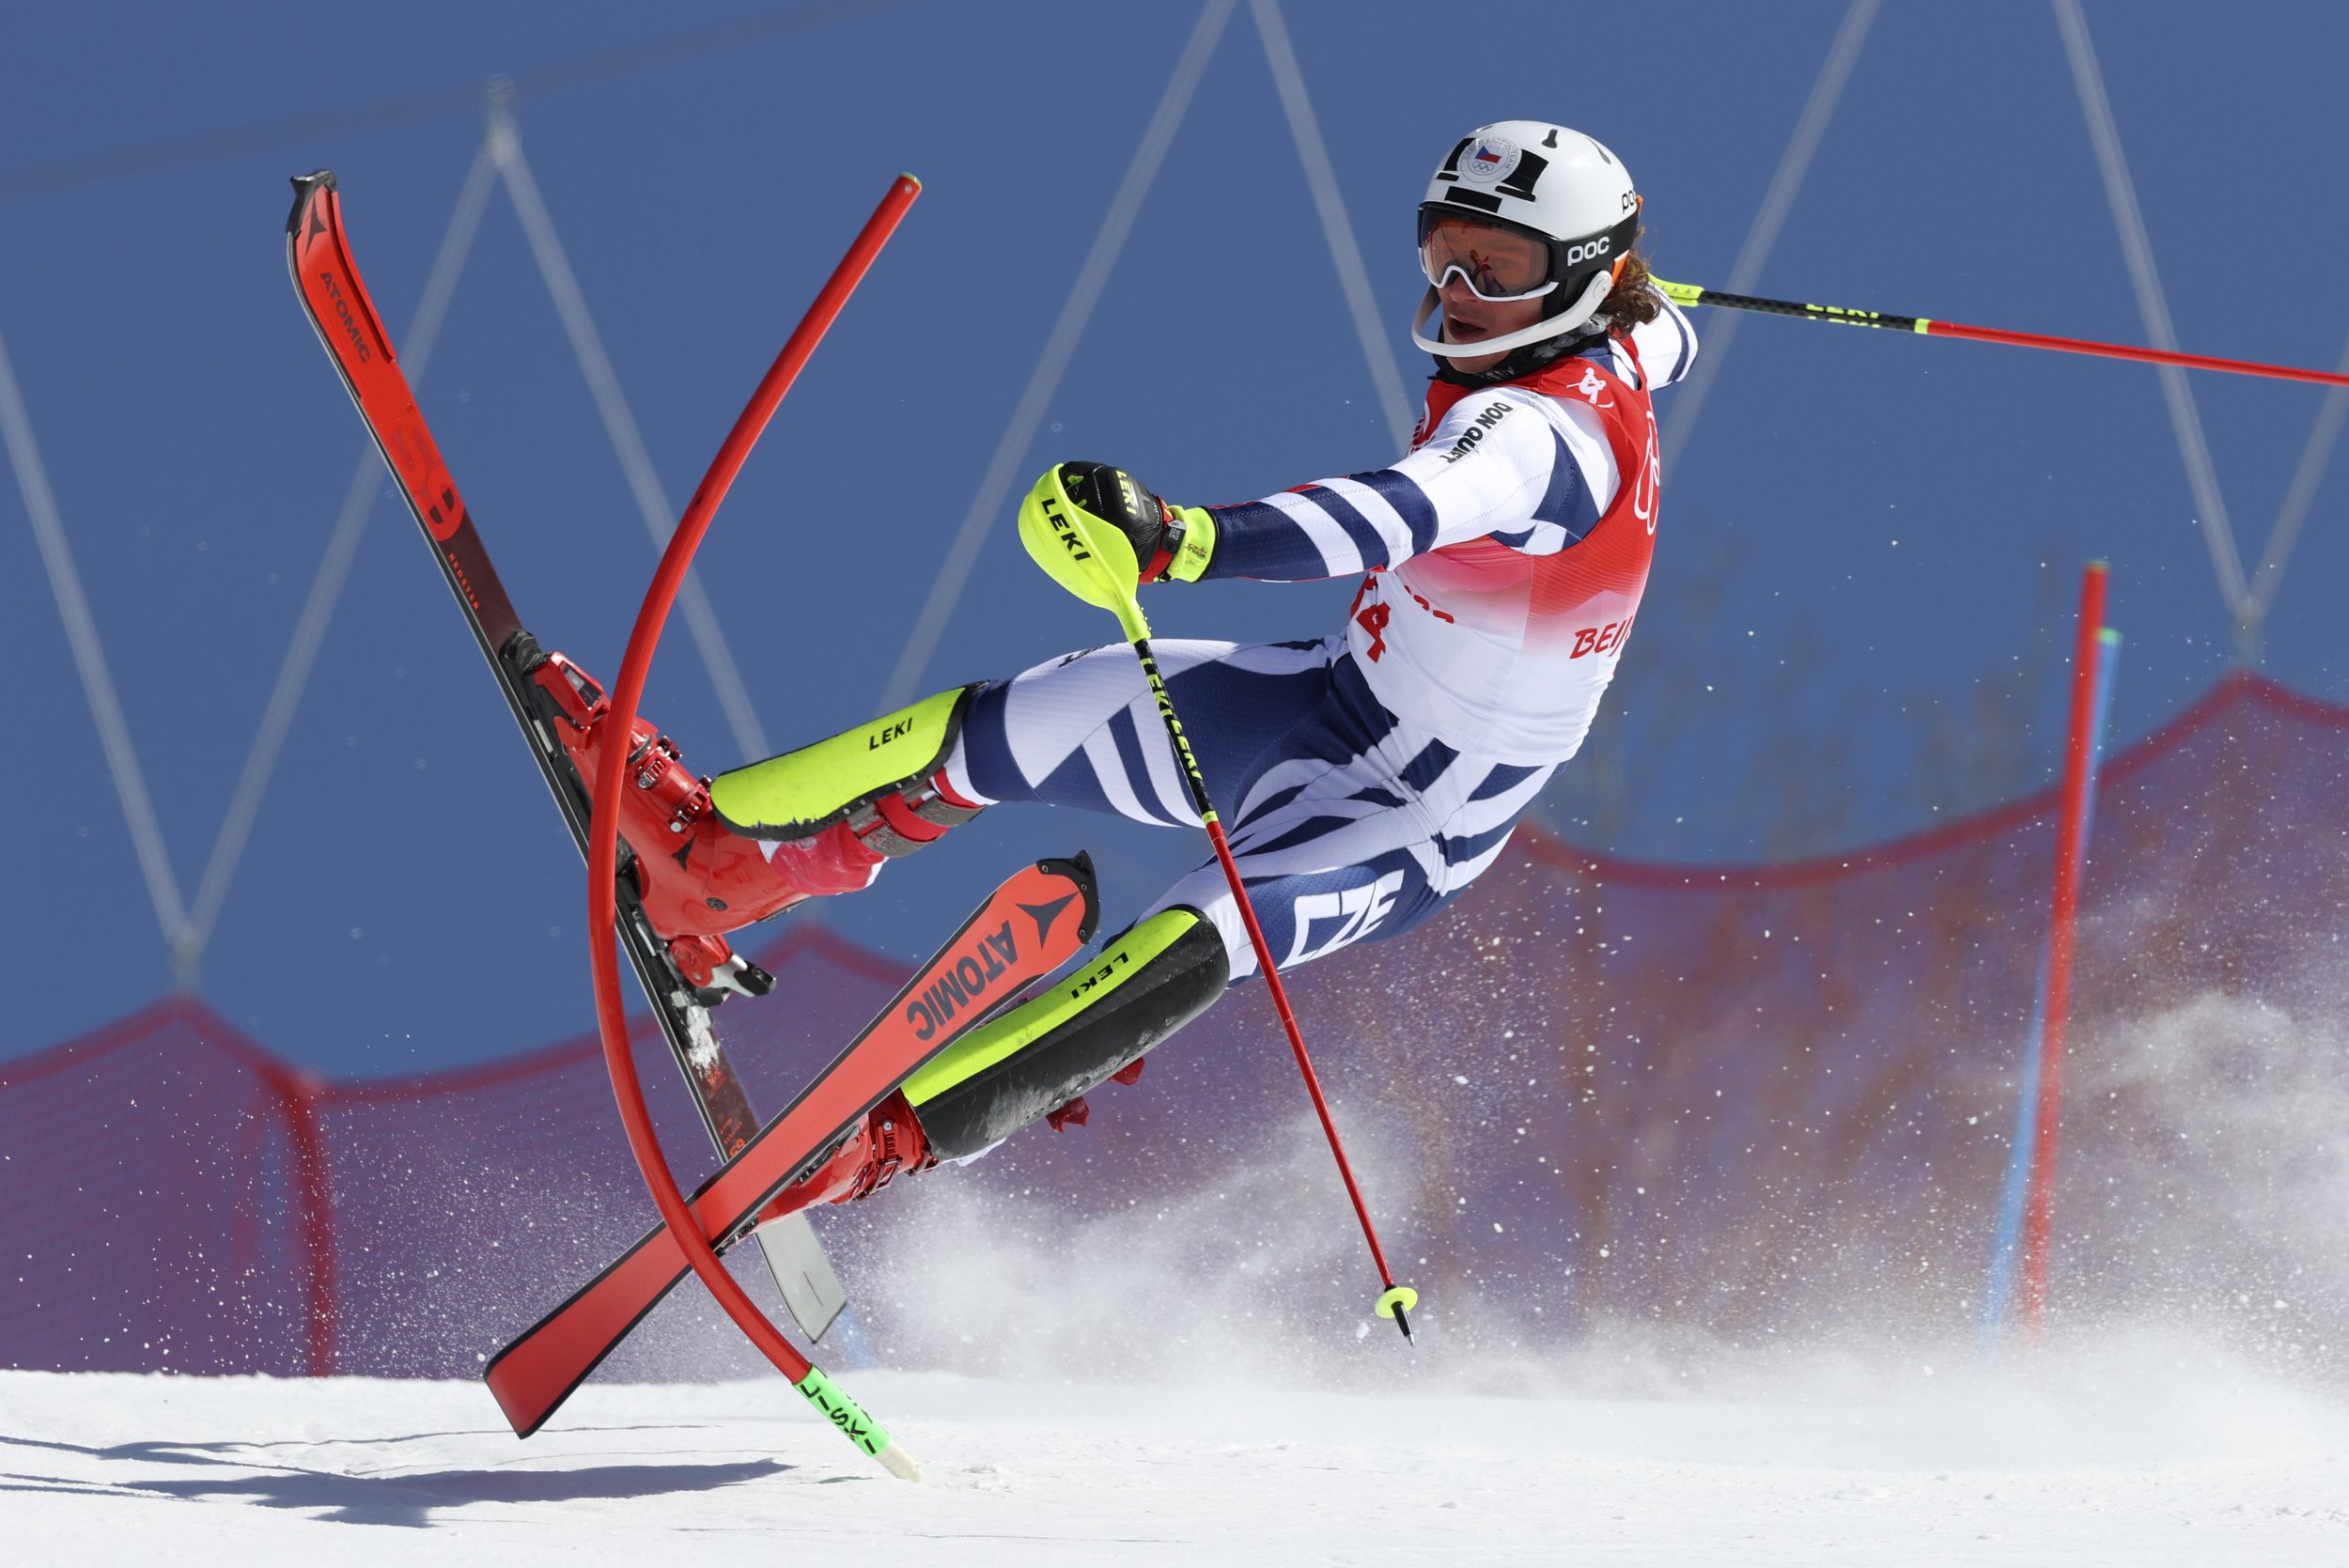  Jan Zabystran, of Czech Republic crashes out during the first run of the men's slalom at the 2022 Winter Olympics, Wednesday, Feb. 16, 2022, in the Yanqing district of Beijing. (AP Photo/Alessandro Trovati) 